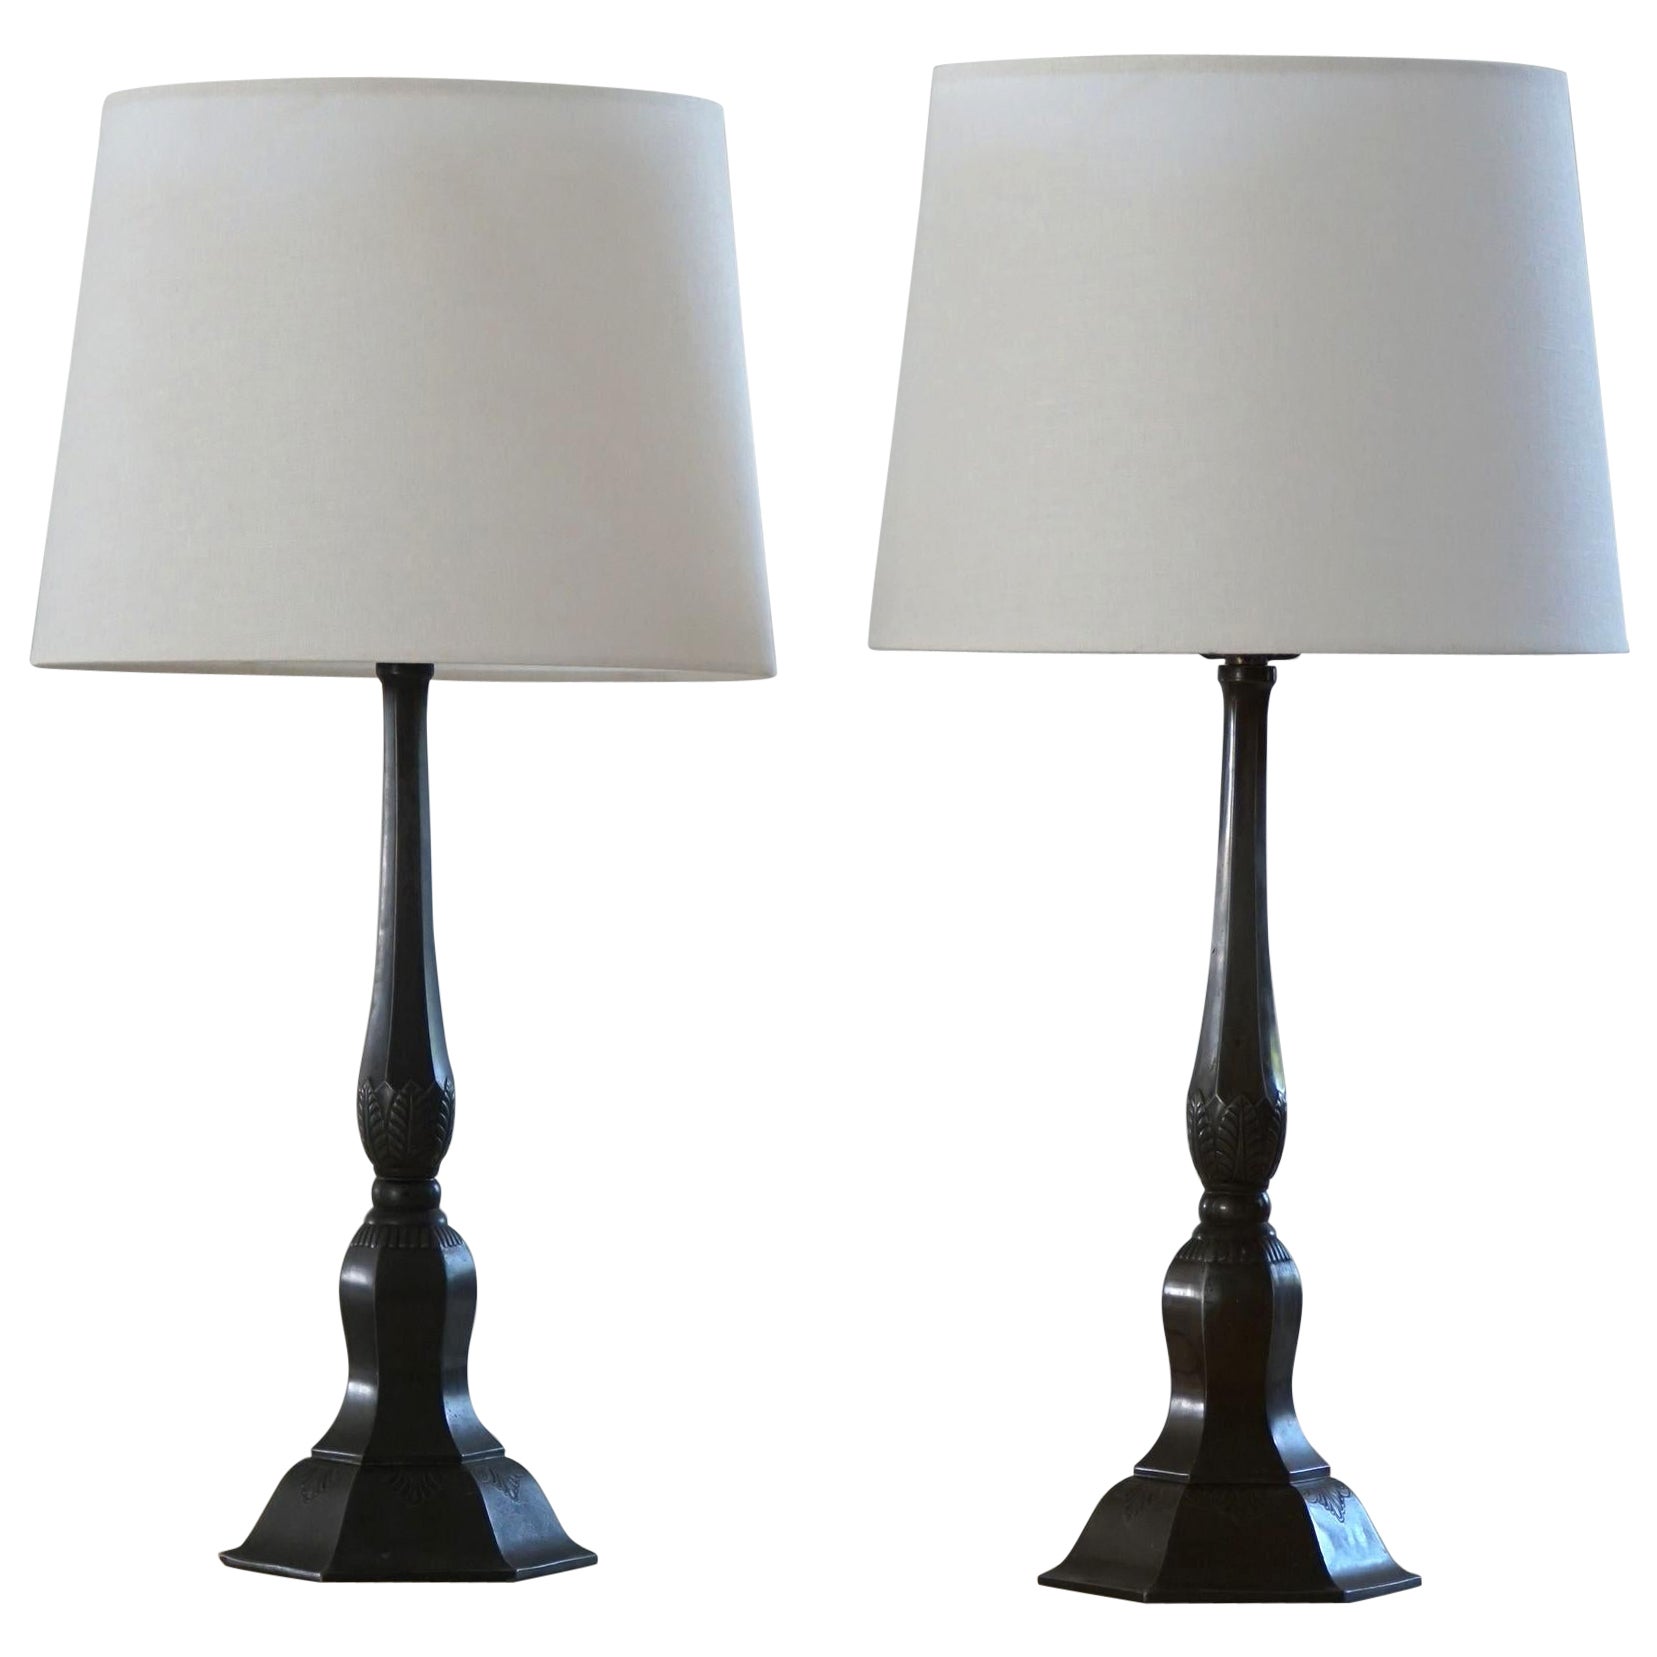 A Pair of Danish Modern Table Lamps from Just Andersen in Diskometal, 1920s For Sale